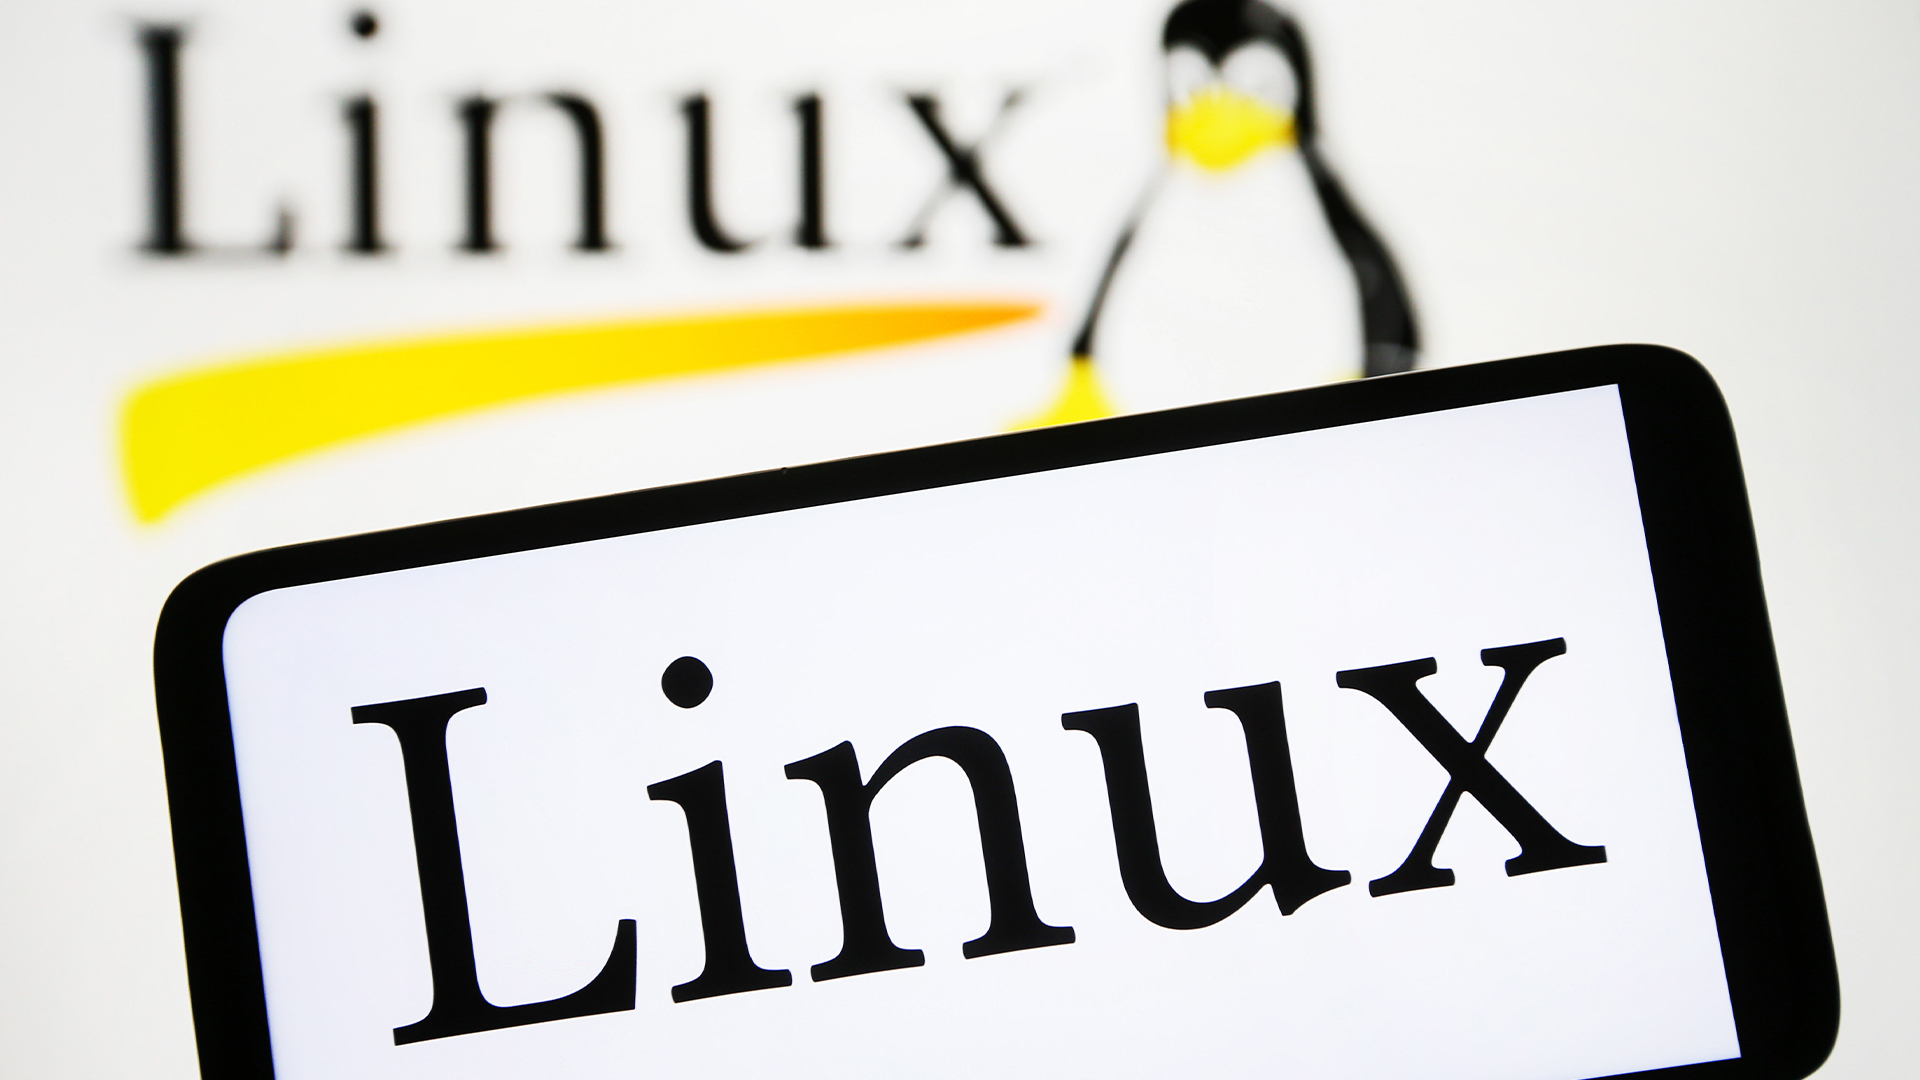 Linux has just achieved a historically high share of the global desktop market, and growing popularity in India is driving adoption of the open source operating system.